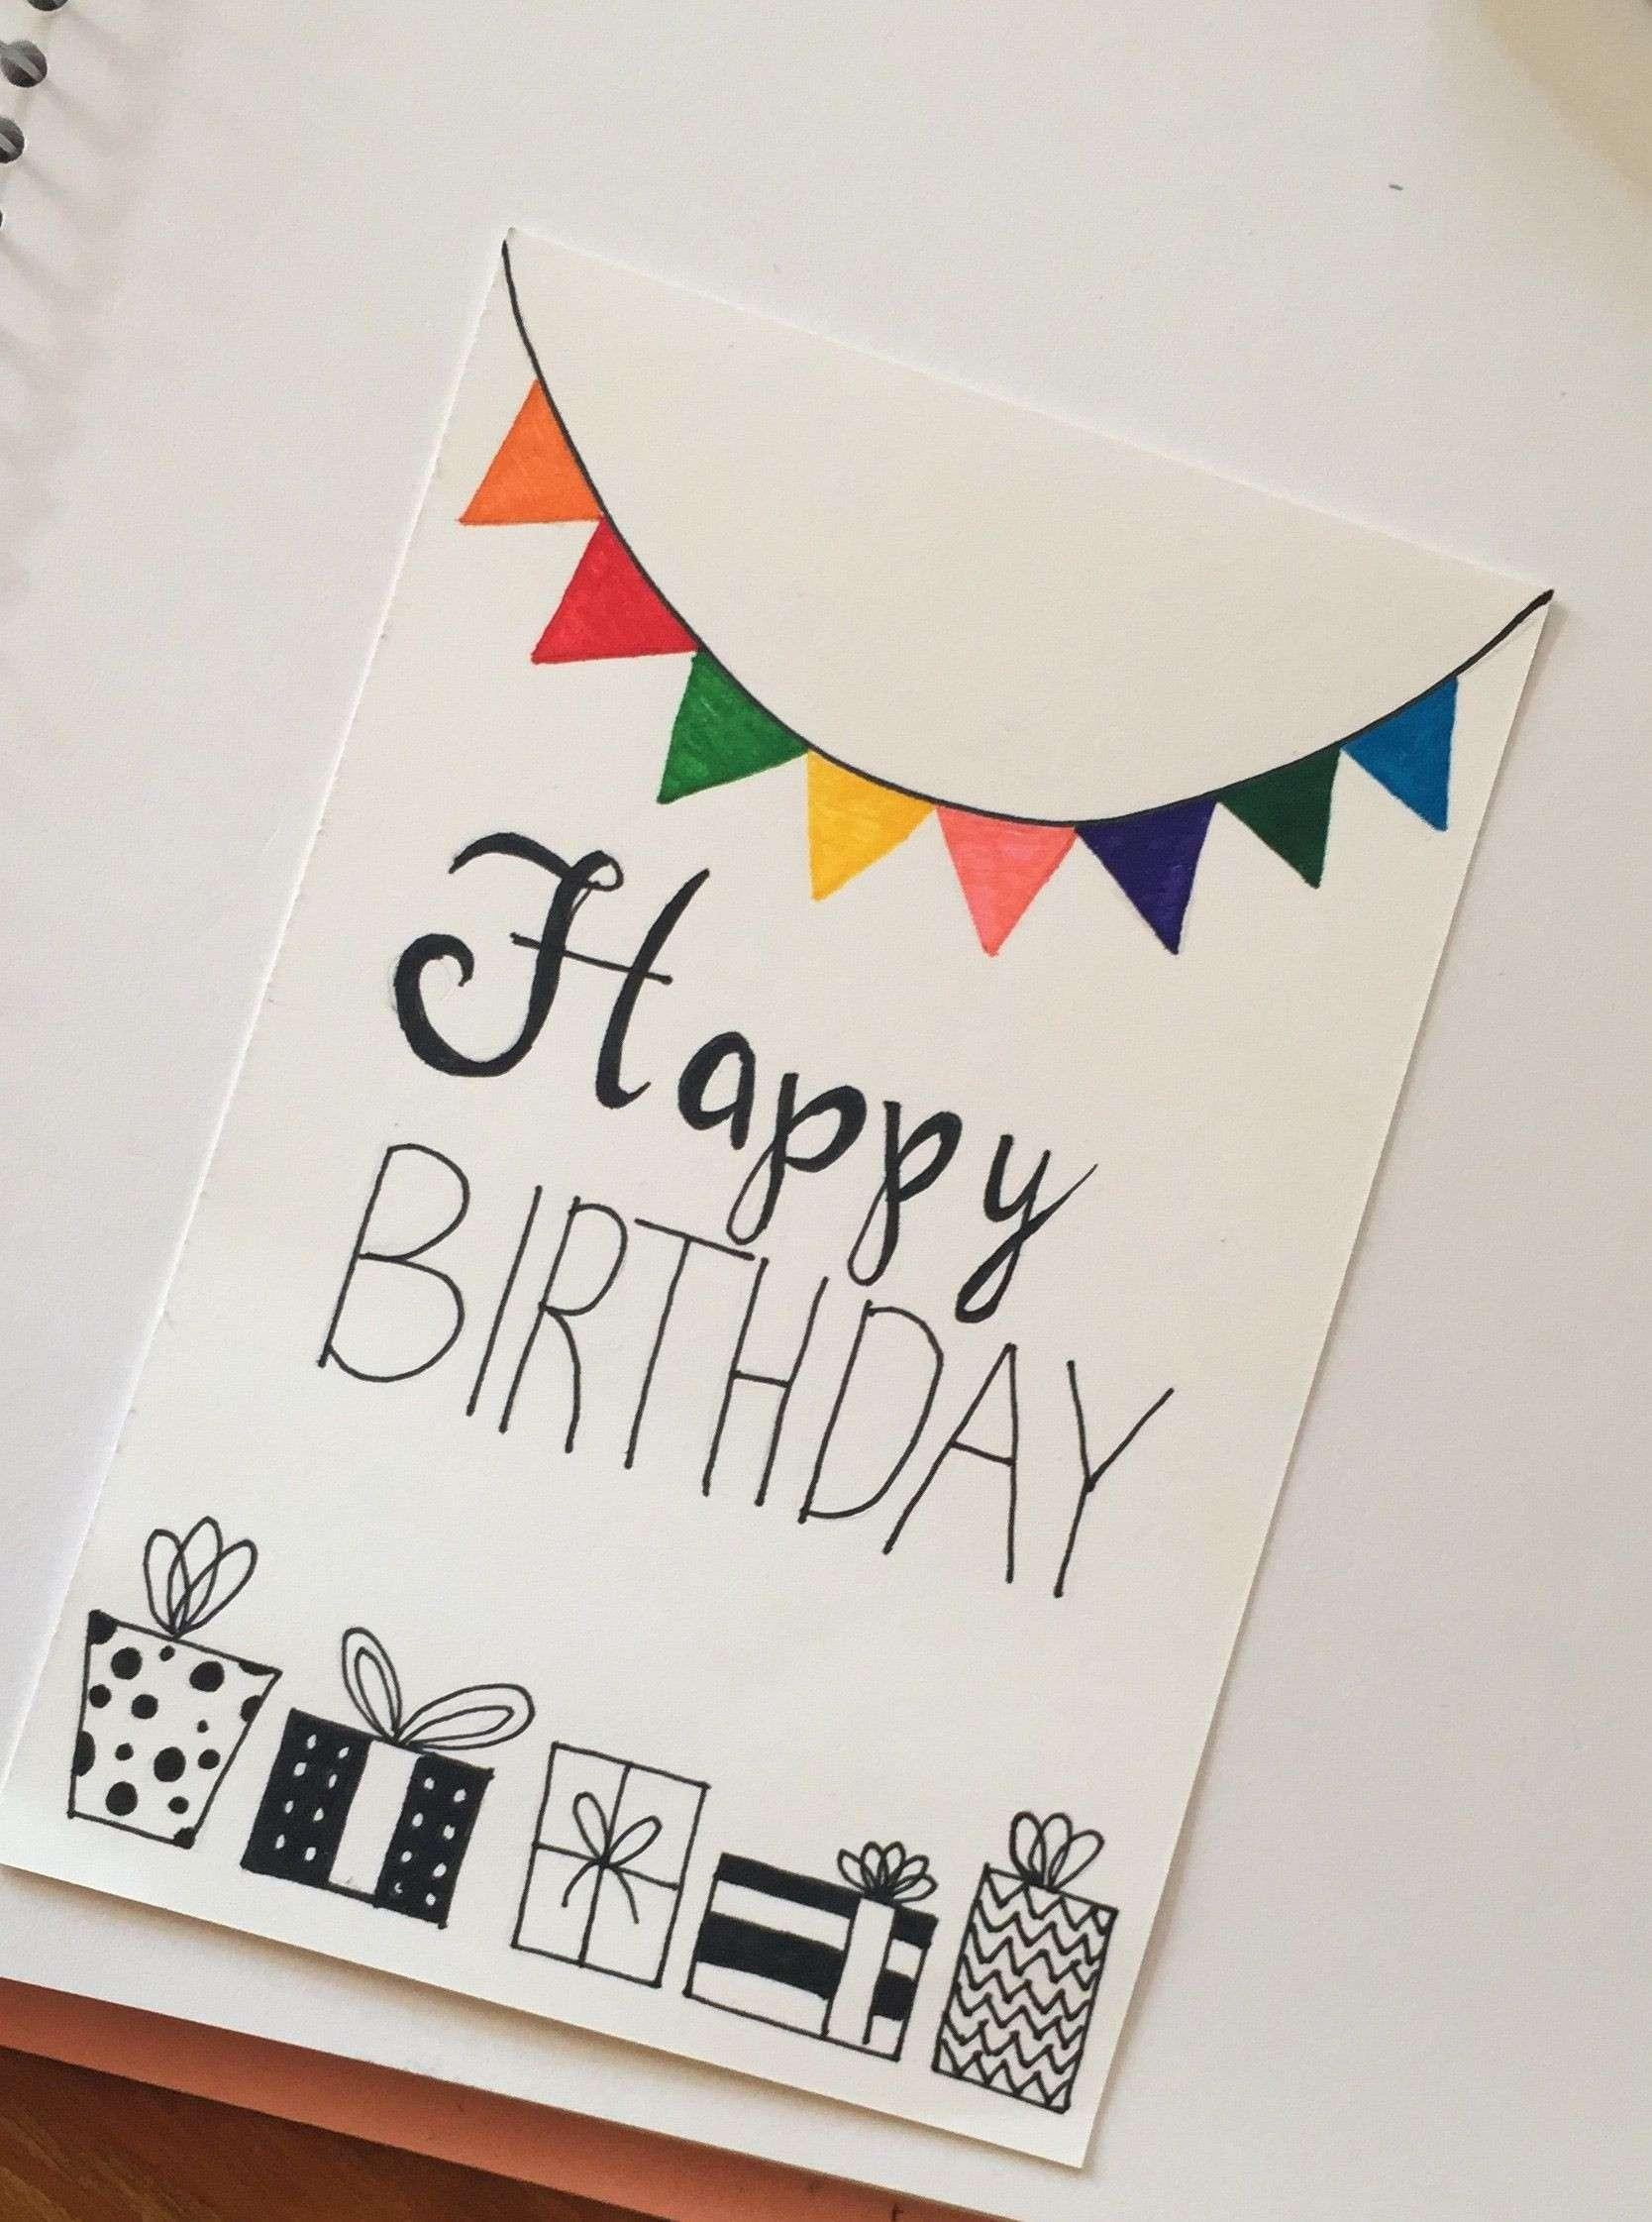 Good Card Ideas For Dads Birthday Cards Birthday Card Ideas For Friend Sensational Classic Birthday